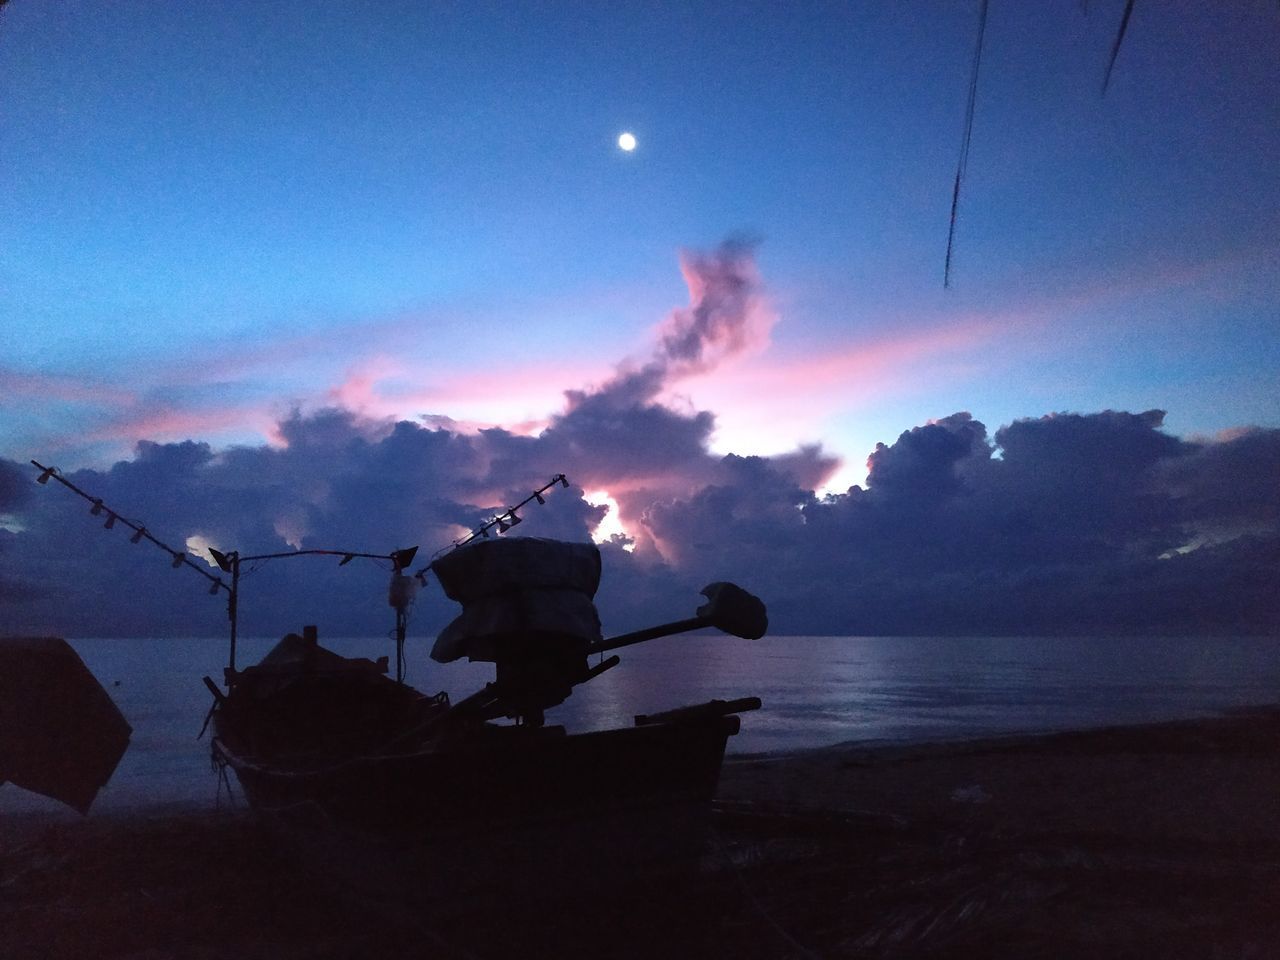 SILHOUETTE SHIP ON BEACH AGAINST SKY DURING SUNSET